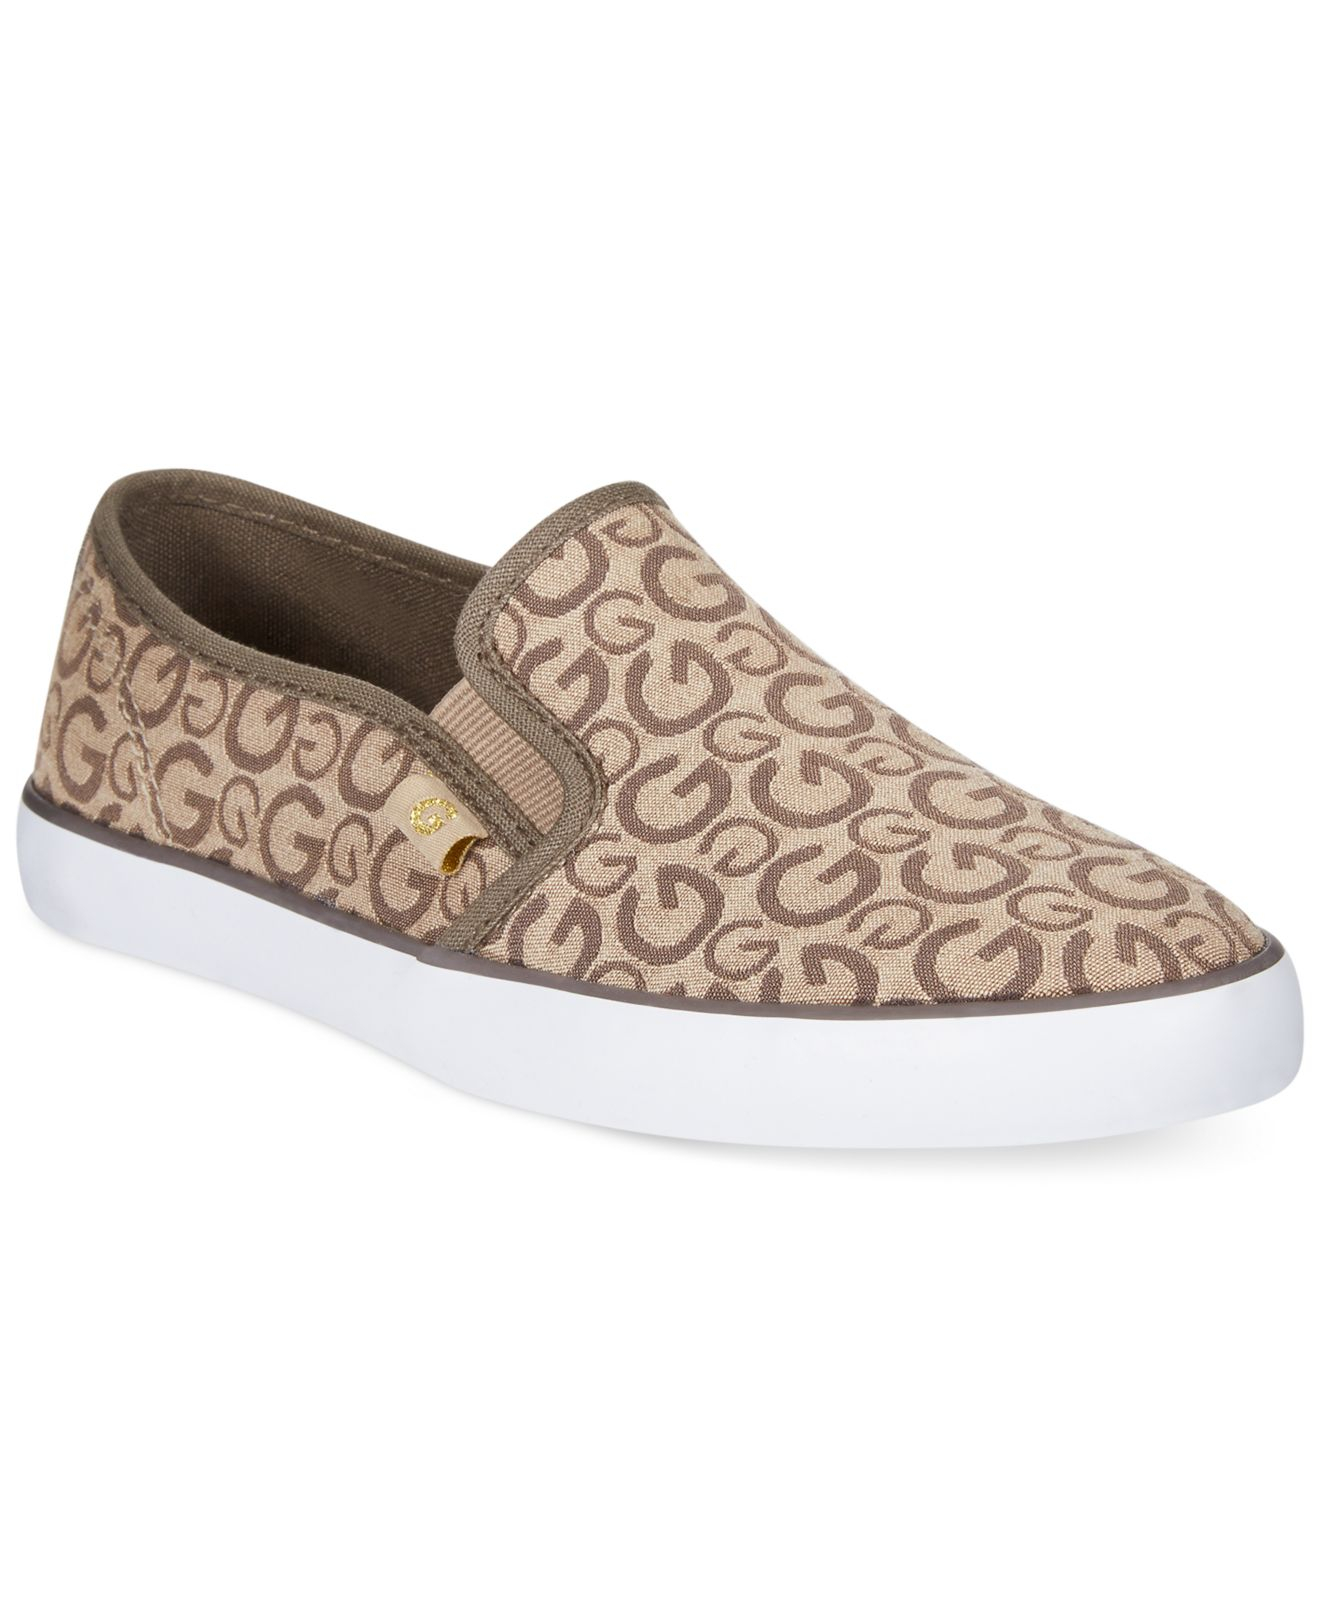 guess slip on shoes cheap online